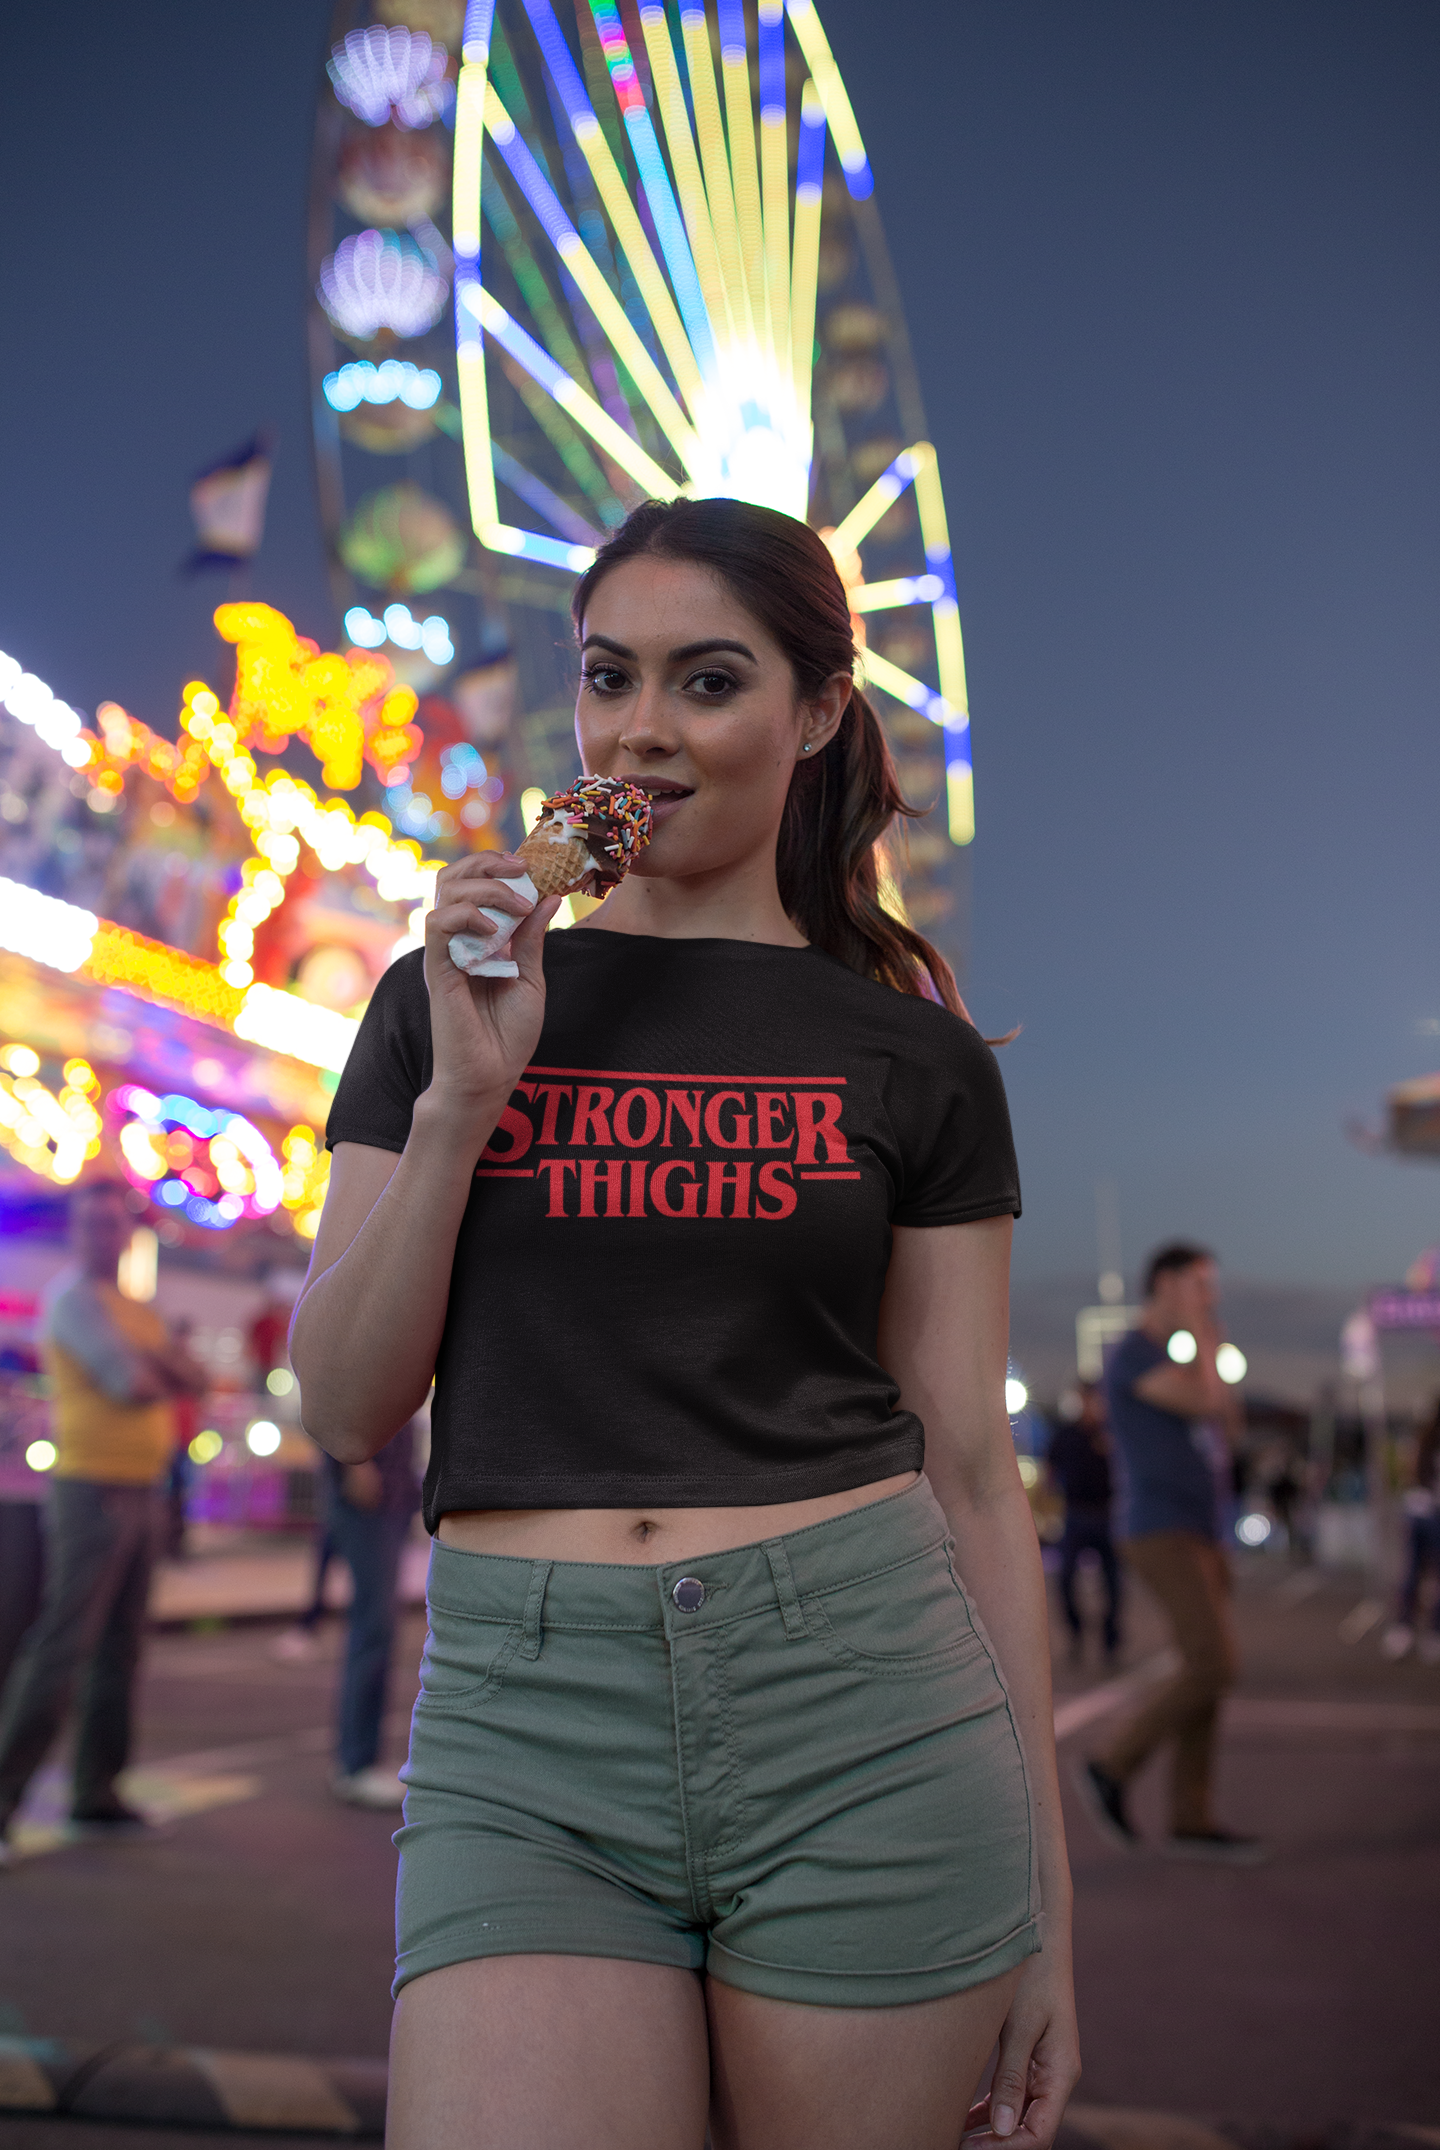 "Stronger Thighs" - Women's Champion Pump Cover Crop